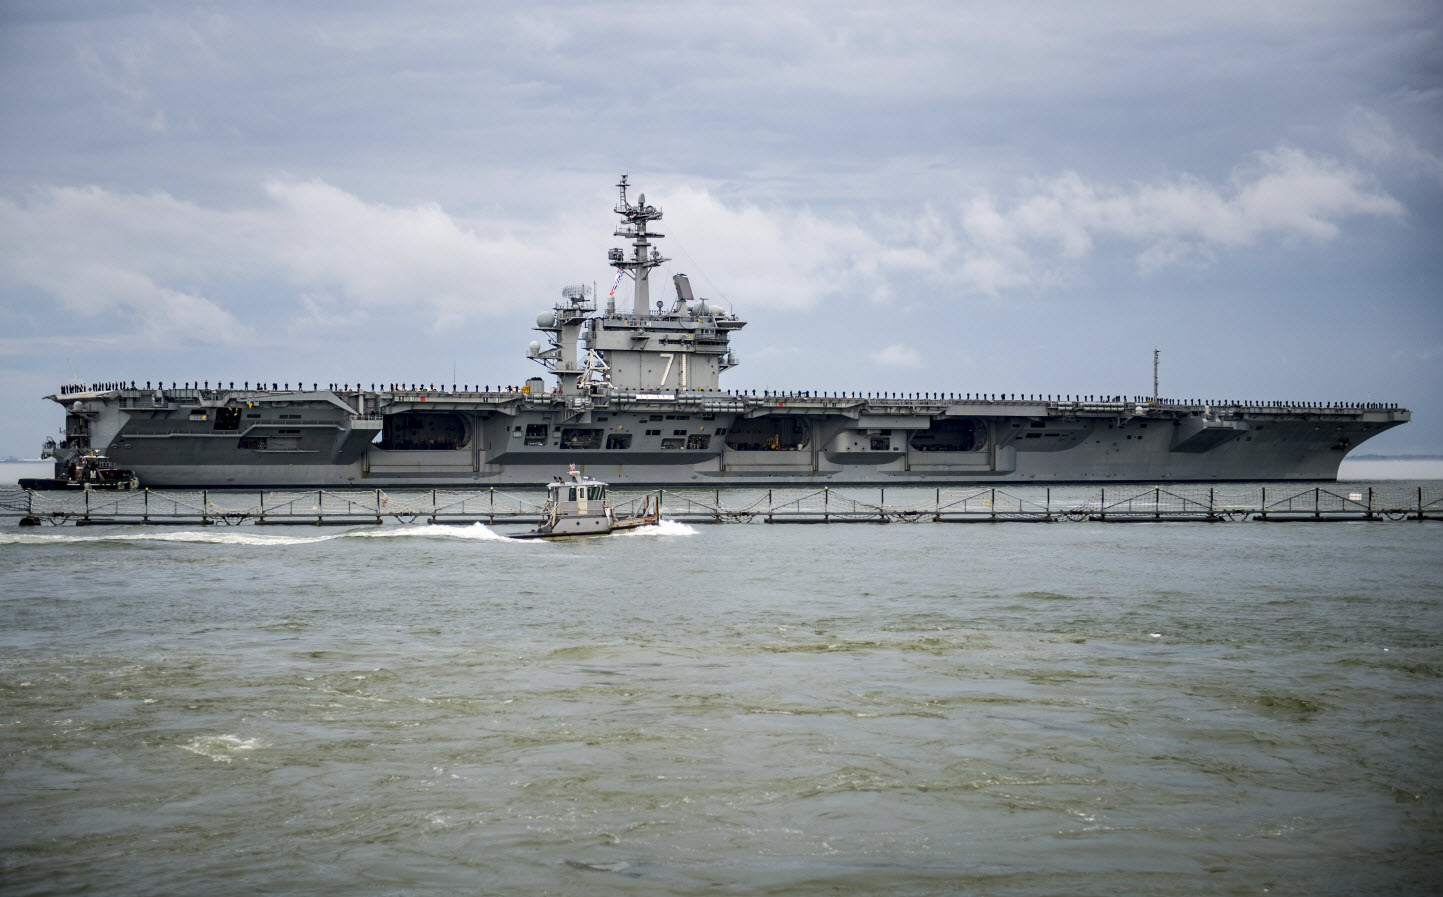 NORFOLK (March 11, 2015) The aircraft carrier USS Theodore Roosevelt (CVN 71) departs Naval Station Norfolk for a scheduled deployment. The deployment is part of a regular rotation of forces to support maritime security operations, provide crisis response capability, and increase theater security cooperation and forward naval presence in the 5th and 6th Fleet areas of operation. U.S. Navy photo by Mass Communication Specialist 2nd Class Justin Wolpert.